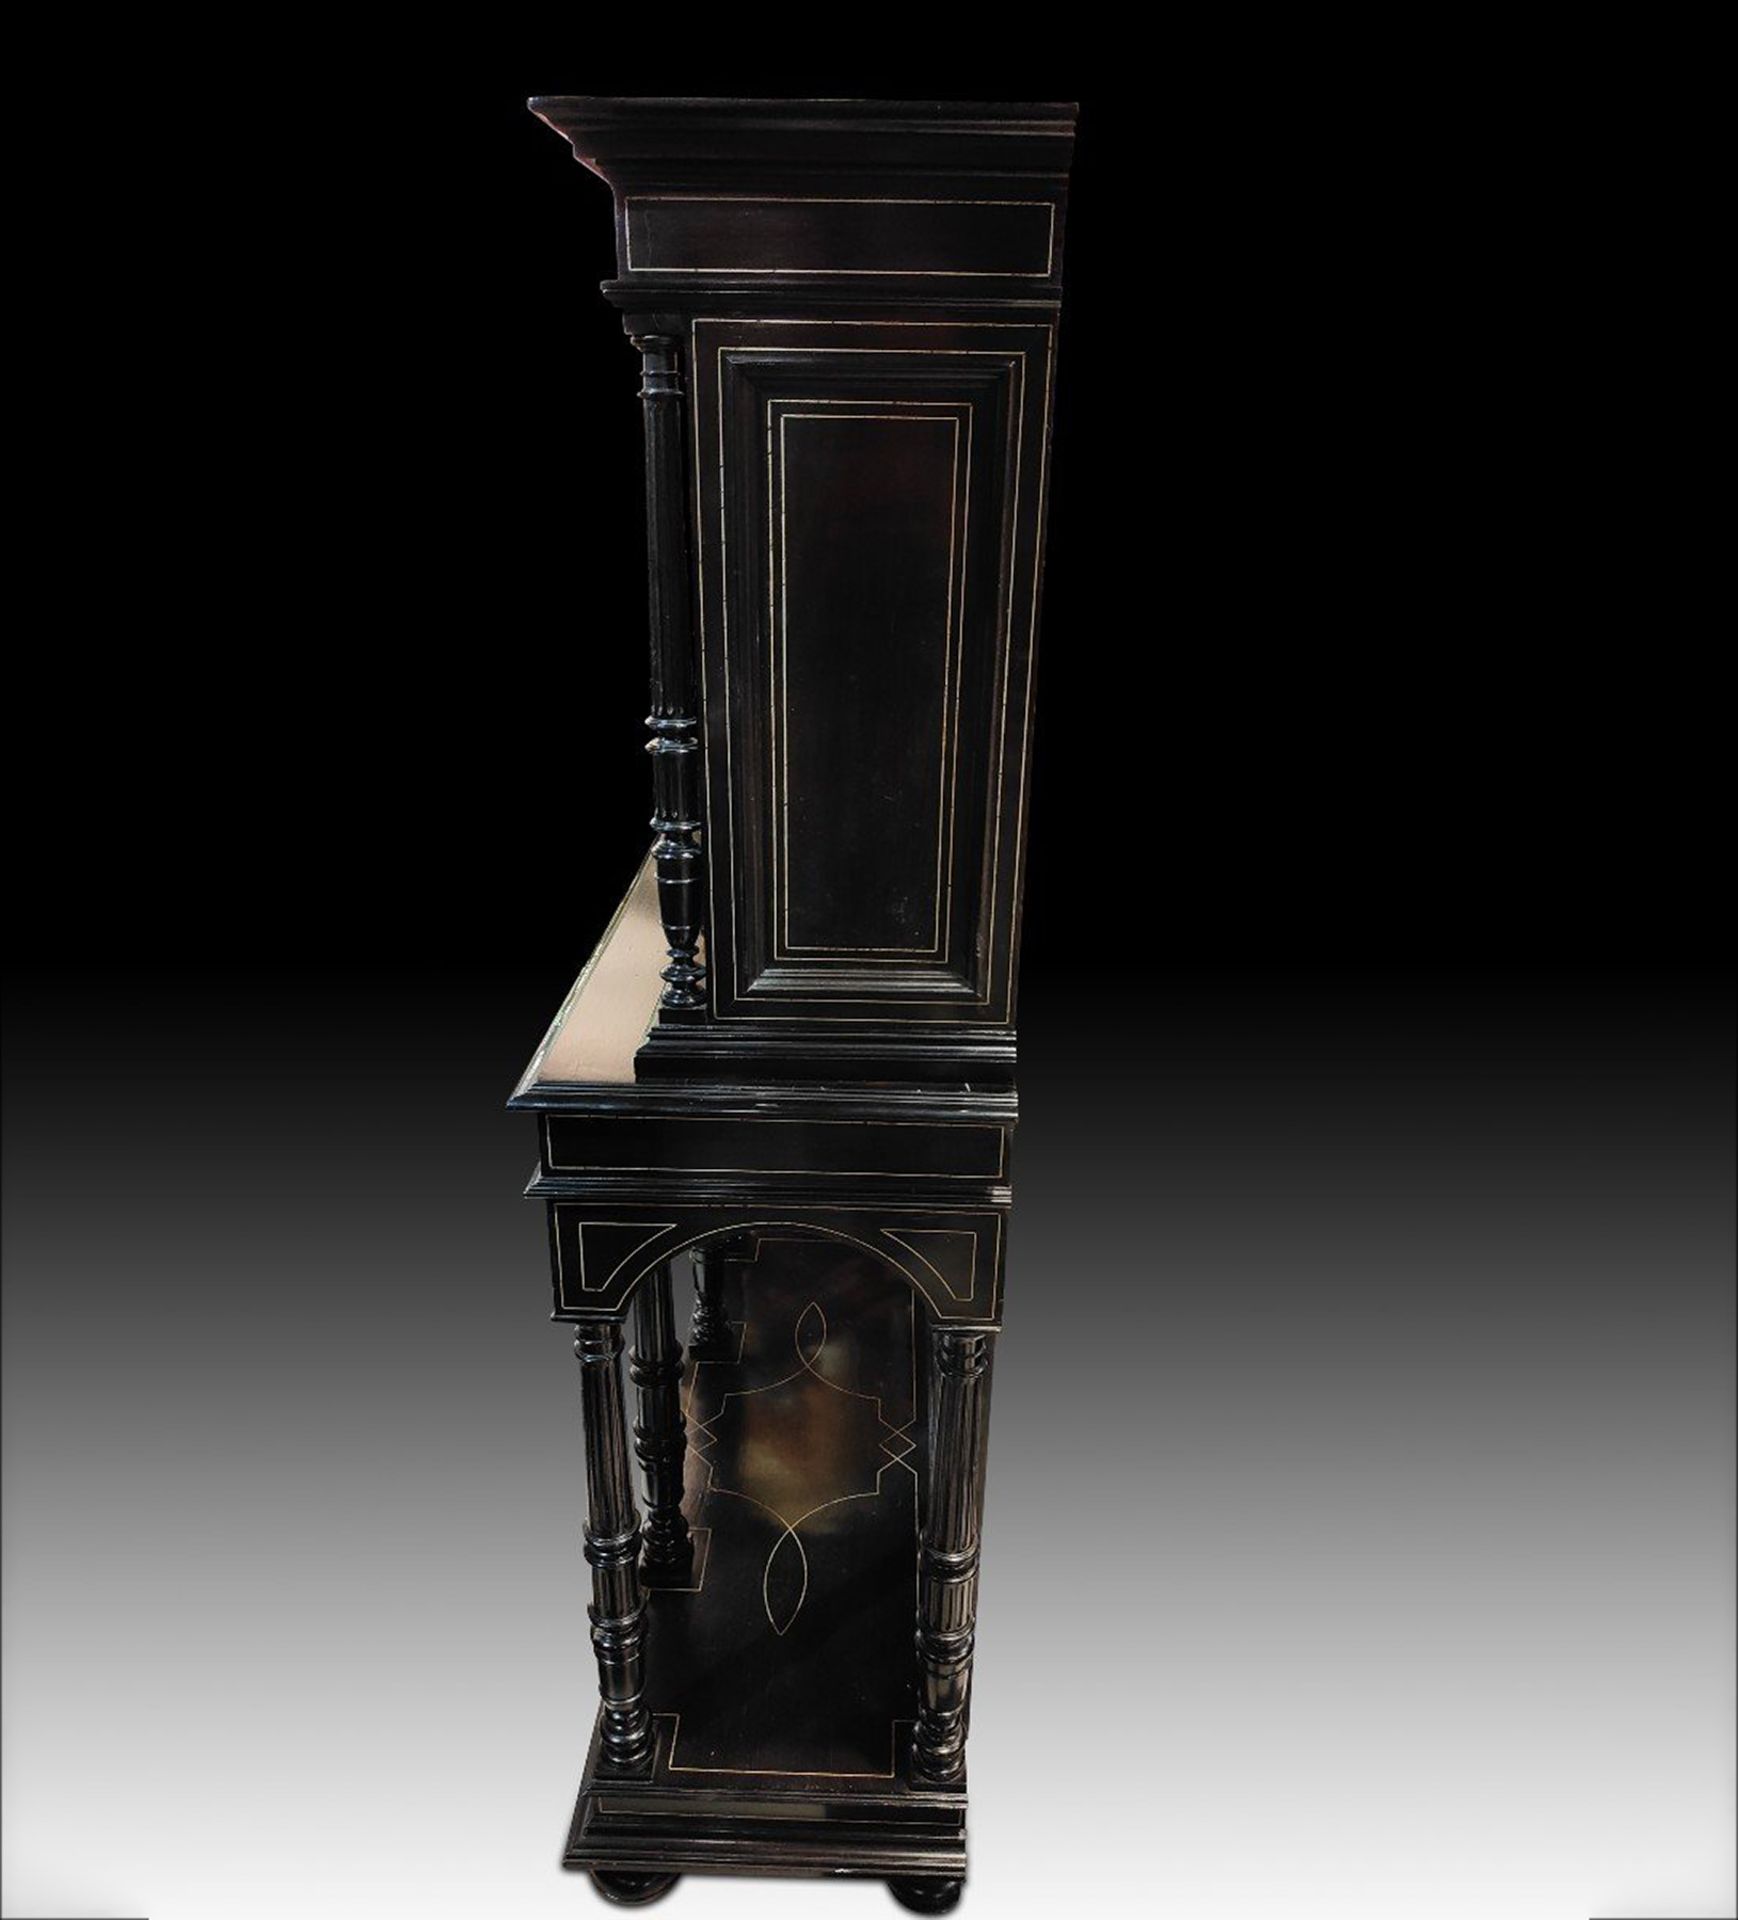 Important 19th century Florentine cabinet with bone marquetry, work from Northern Italy, Milan or Fl - Image 6 of 10